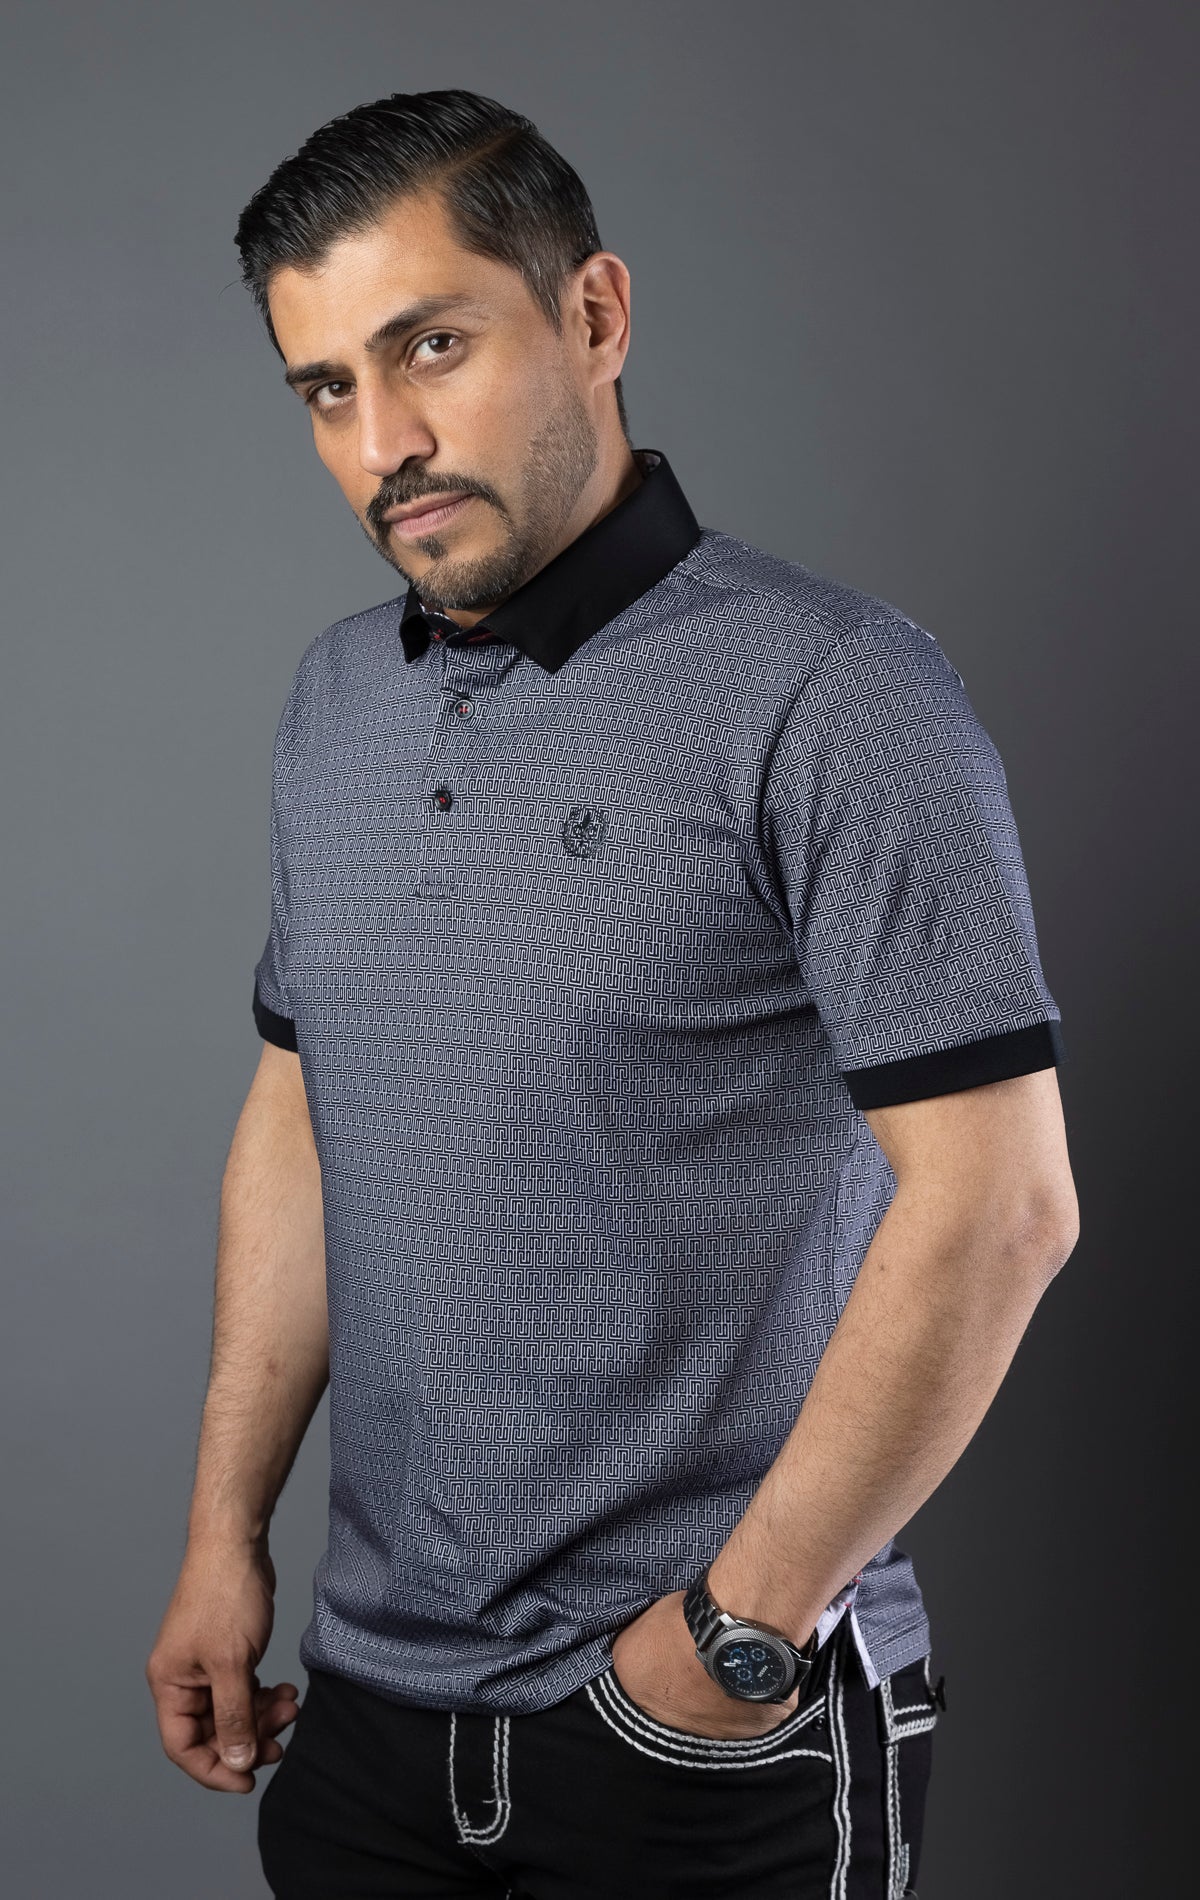 Male model wearing black semi-fitted polo shirt with a contrasting collar. The polo is made from light-colored, breathable knit fabric.